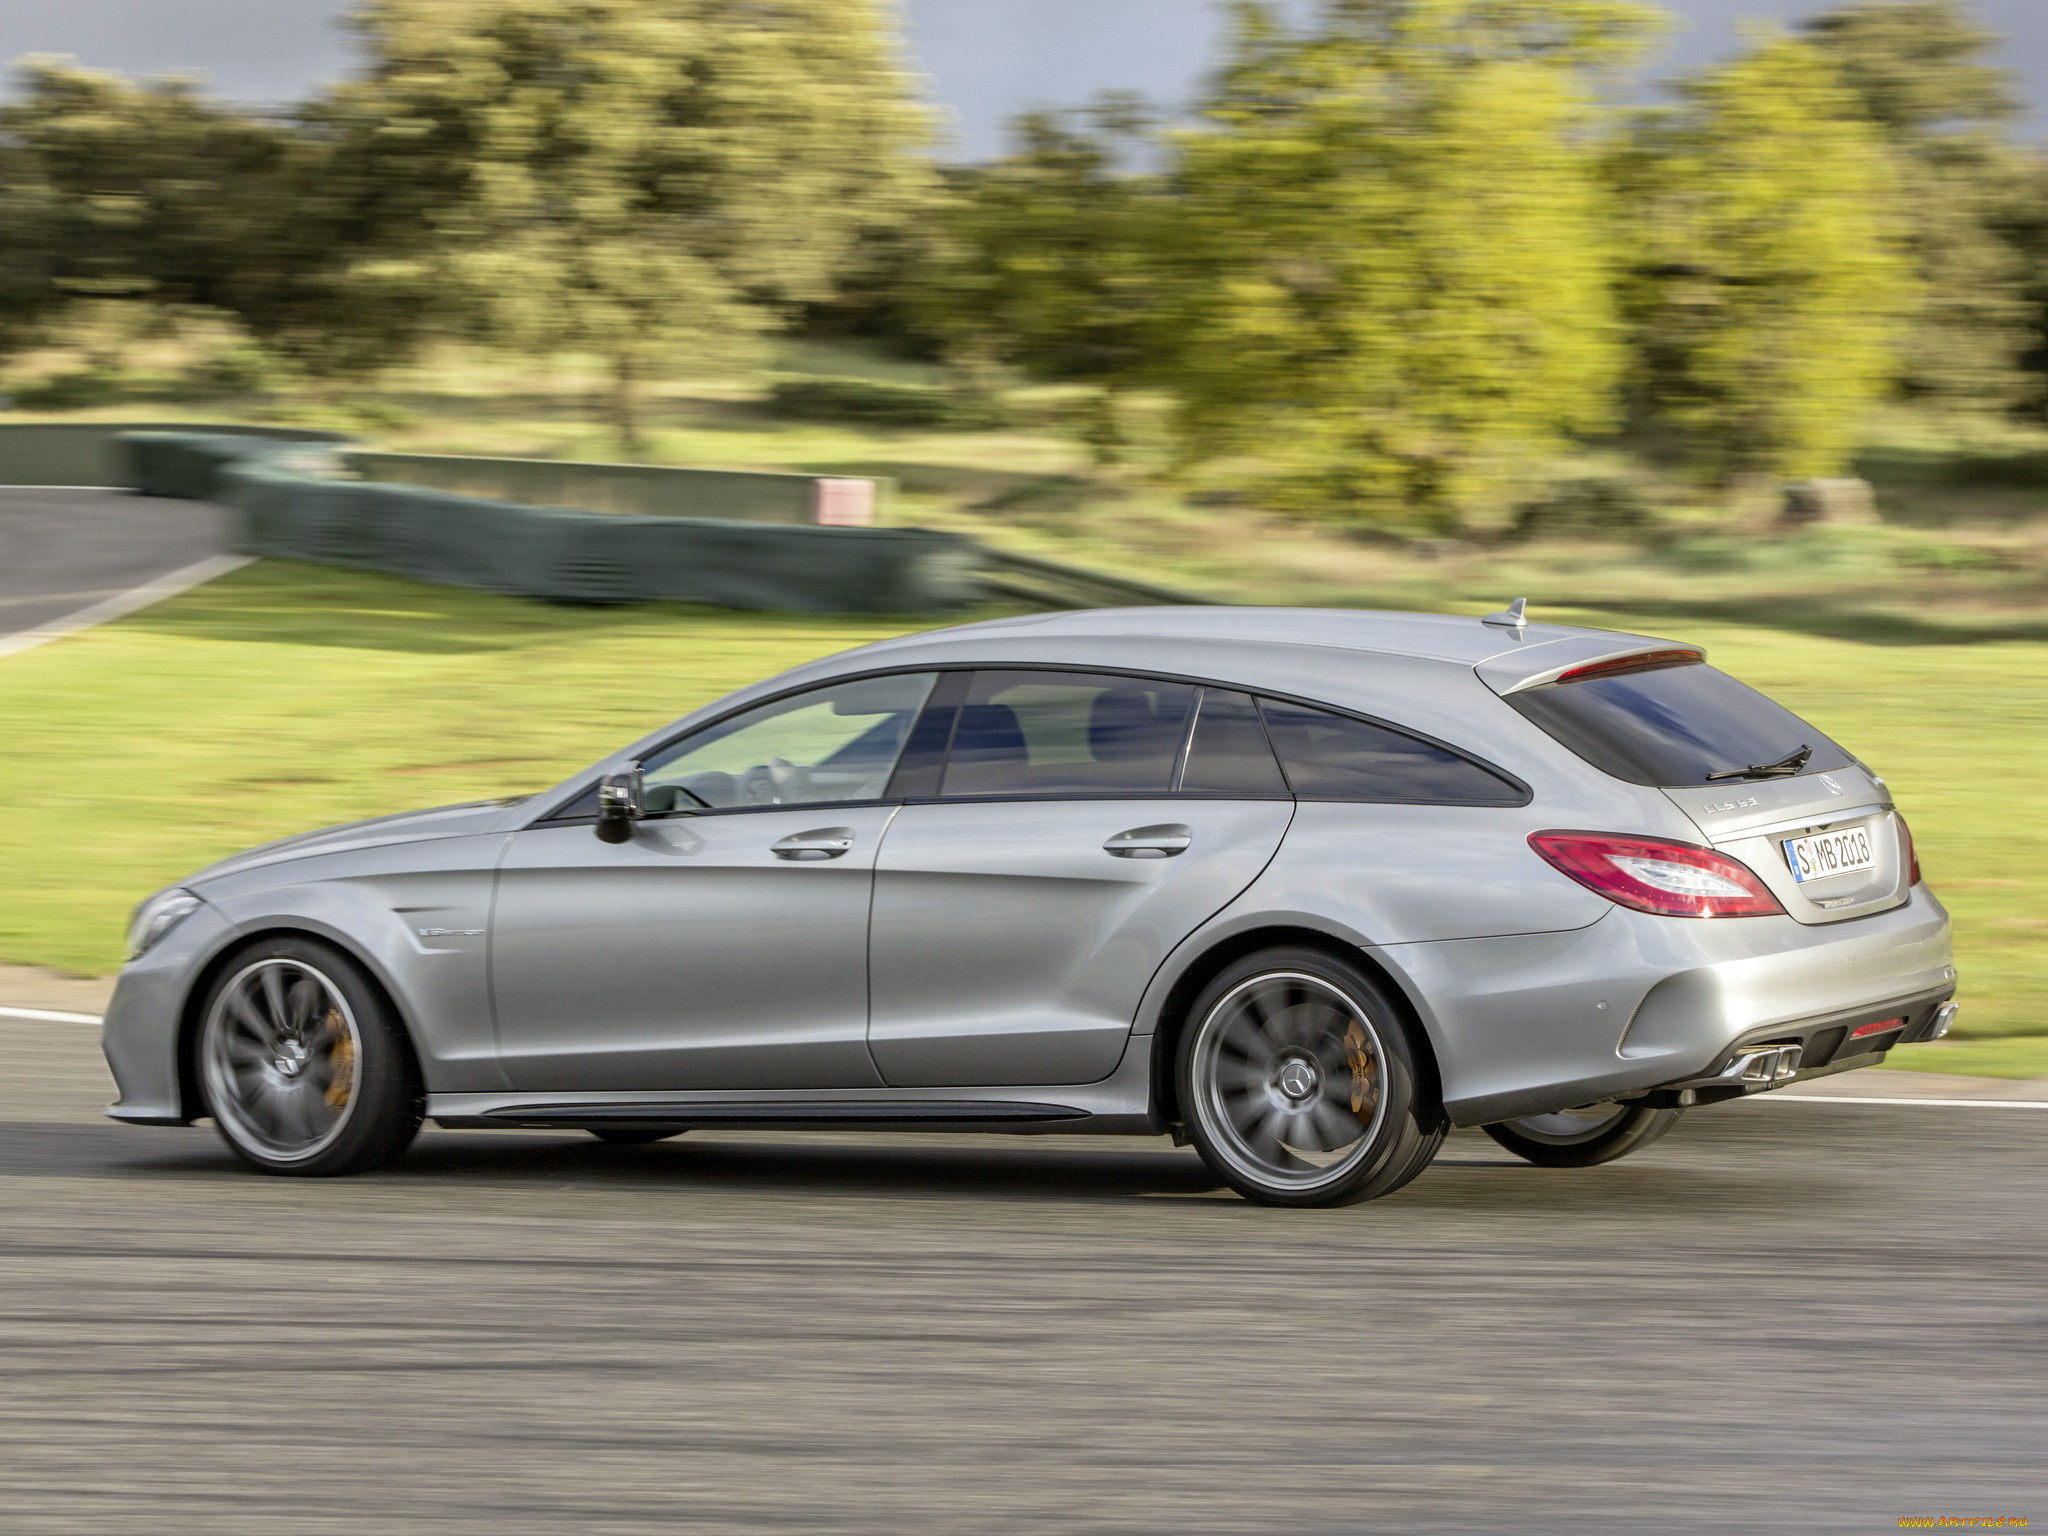 , mercedes-benz, package, , shooting, 2014, amg, cls, 400, brake, x218, sports